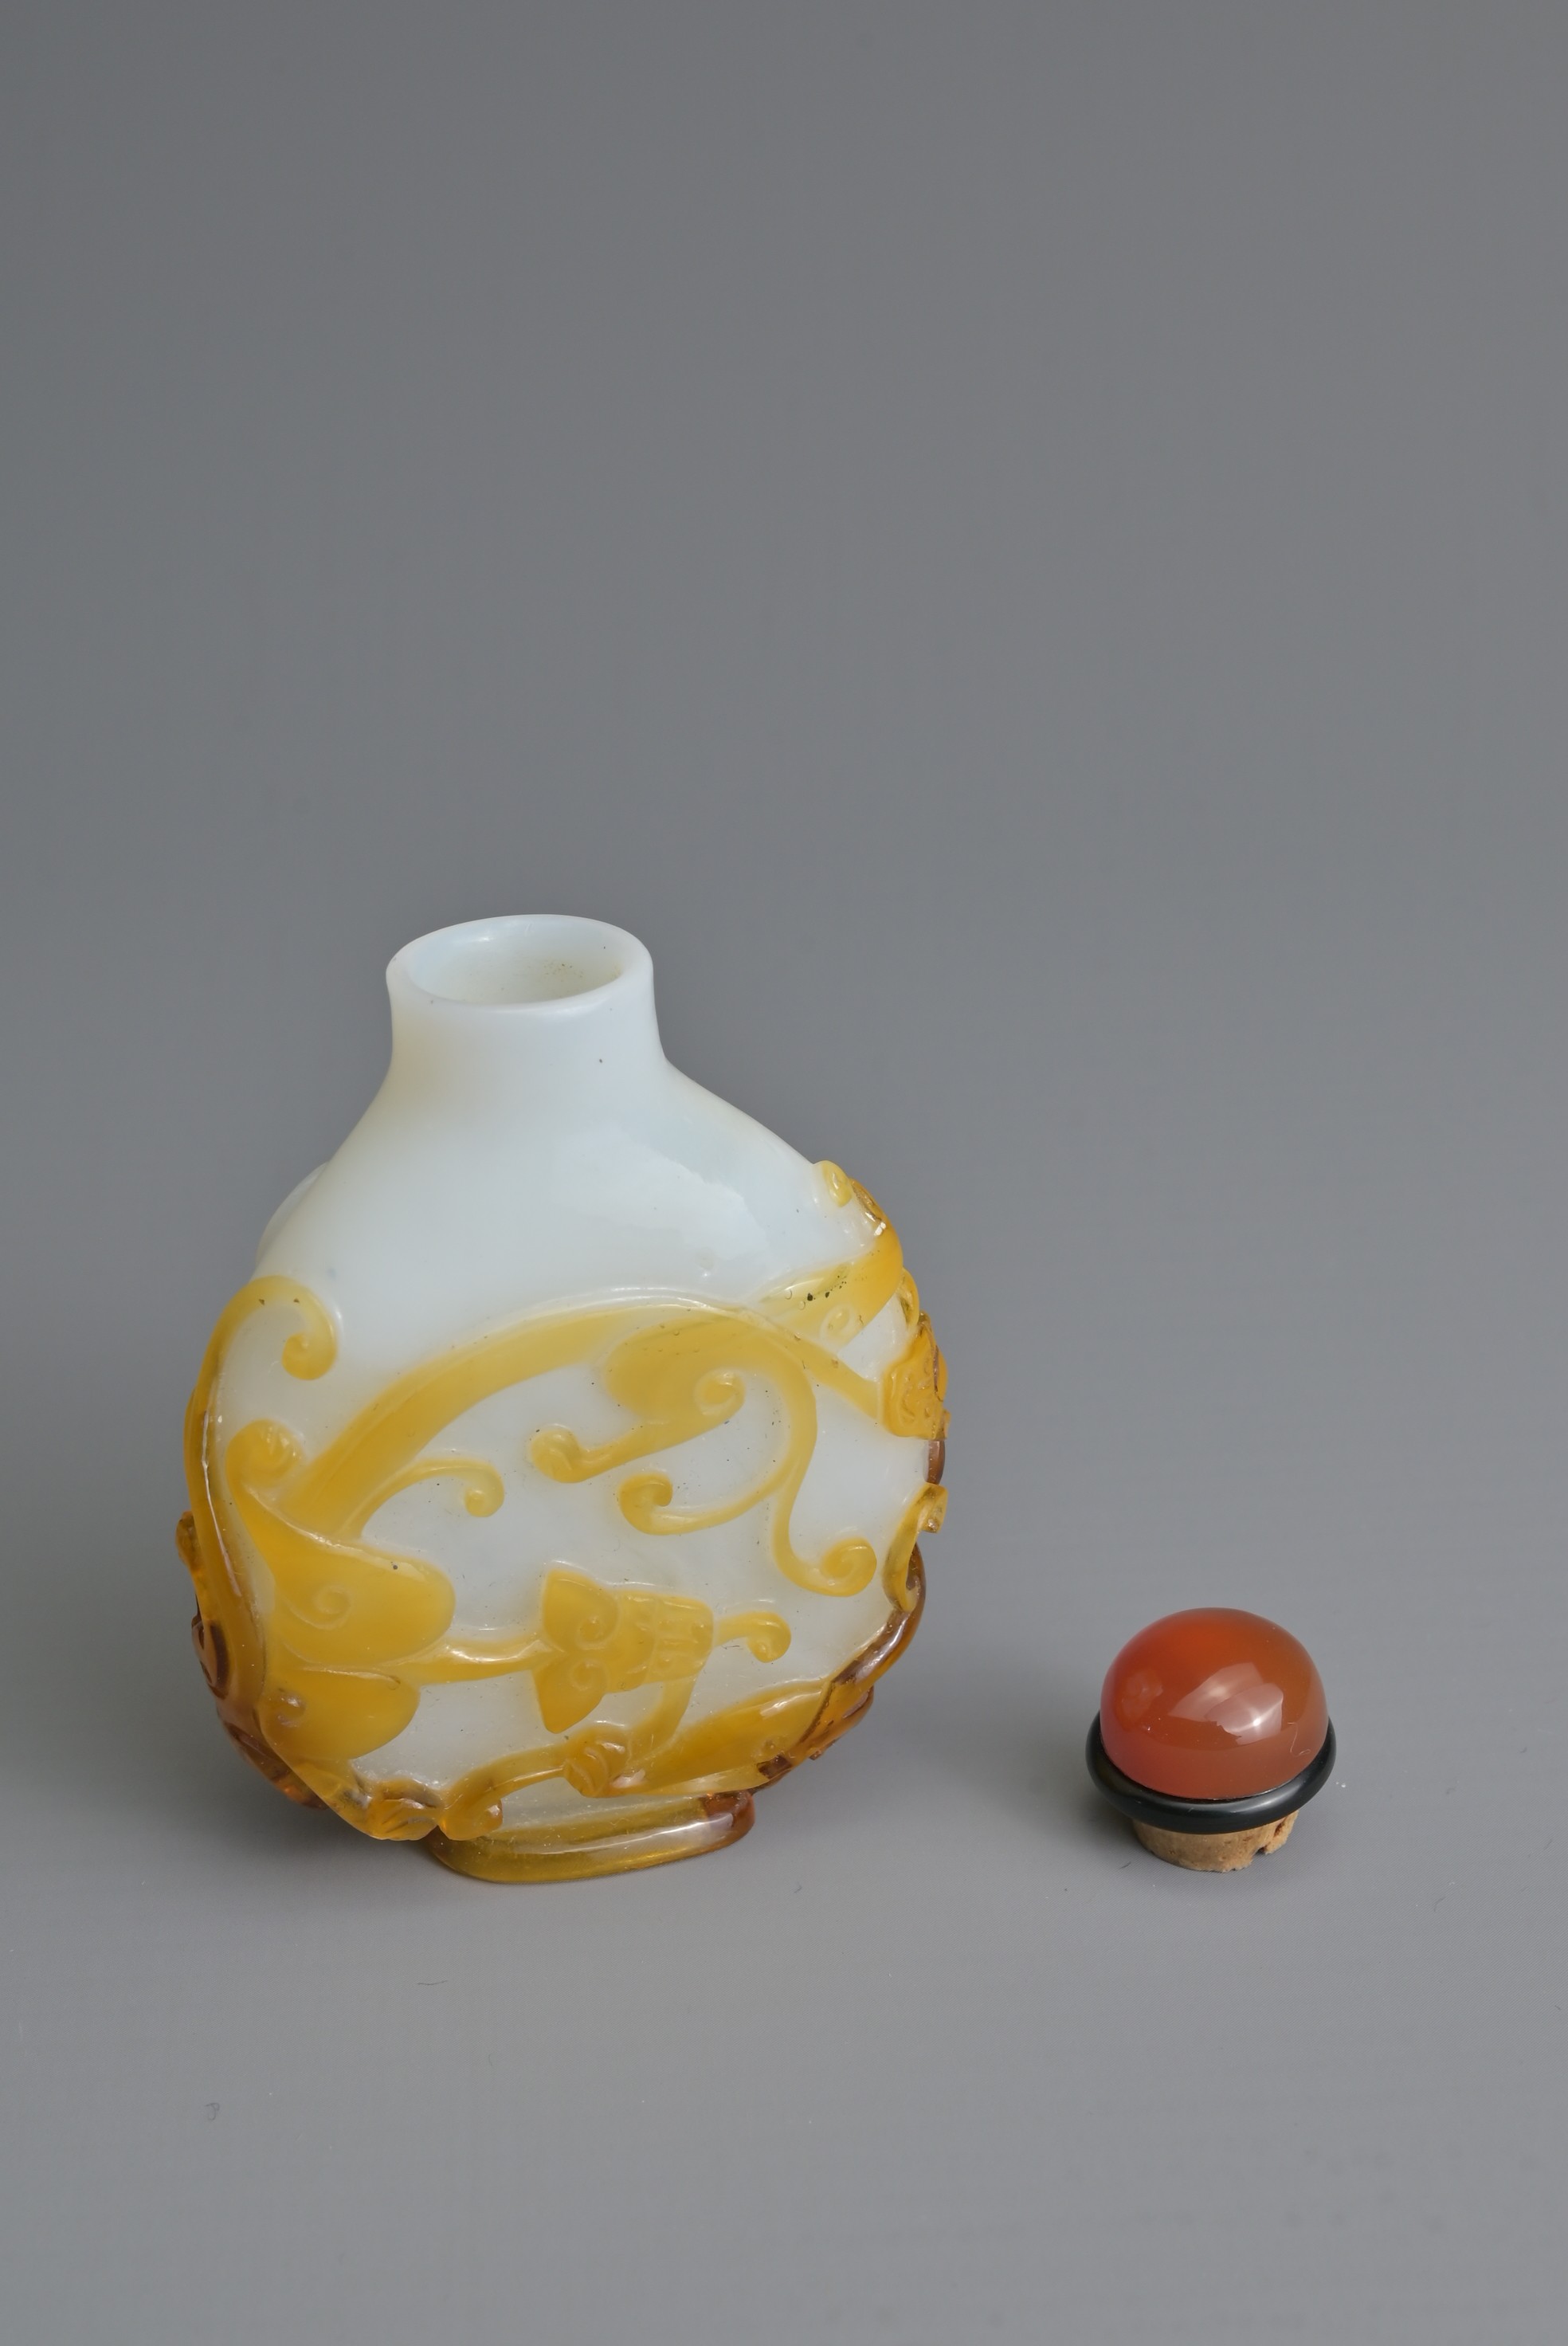 A CHINESE AMBER OVERLAY GLASS SNUFF BOTTLE, QING DYNASTY. Of flattened ovoid form featuring - Image 7 of 7